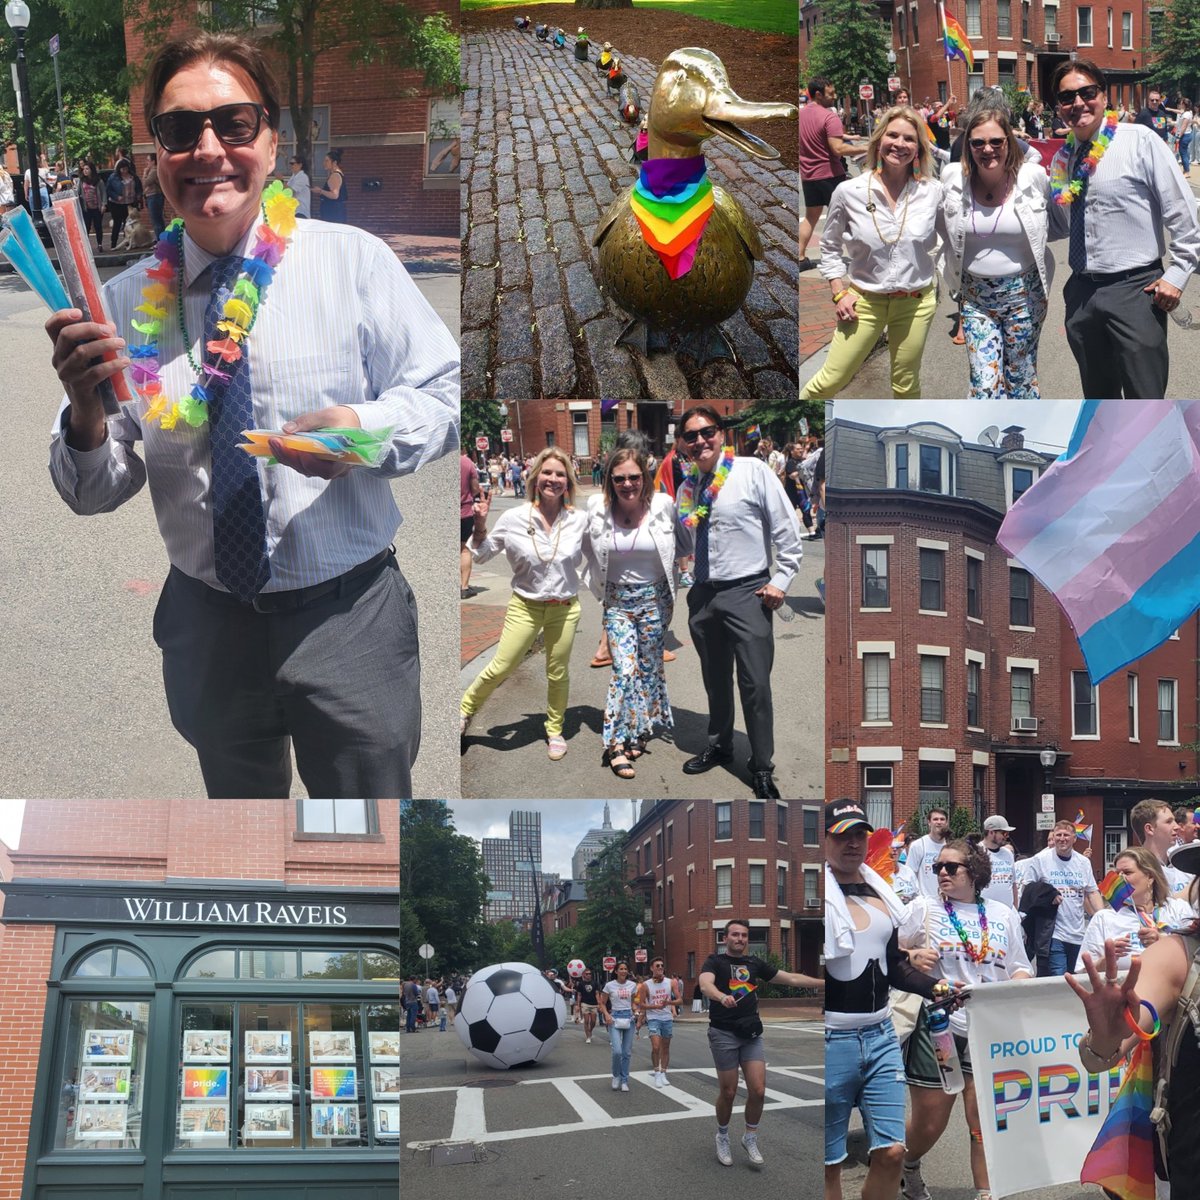 Happy Pride Boston! Had a fun day handing out Freeze Pops to the Pride Parade Peeps w/my South End Raveis Office. Who wants a Freeze Pop!?🌈❤️ 💛💚💙💜#BostonPride #BostonMa #Pride #PrideParade #WilliamRaye #BostonRealEstate #SouthEndBoston #BostonPrideForThePeople #WilliamRaveis